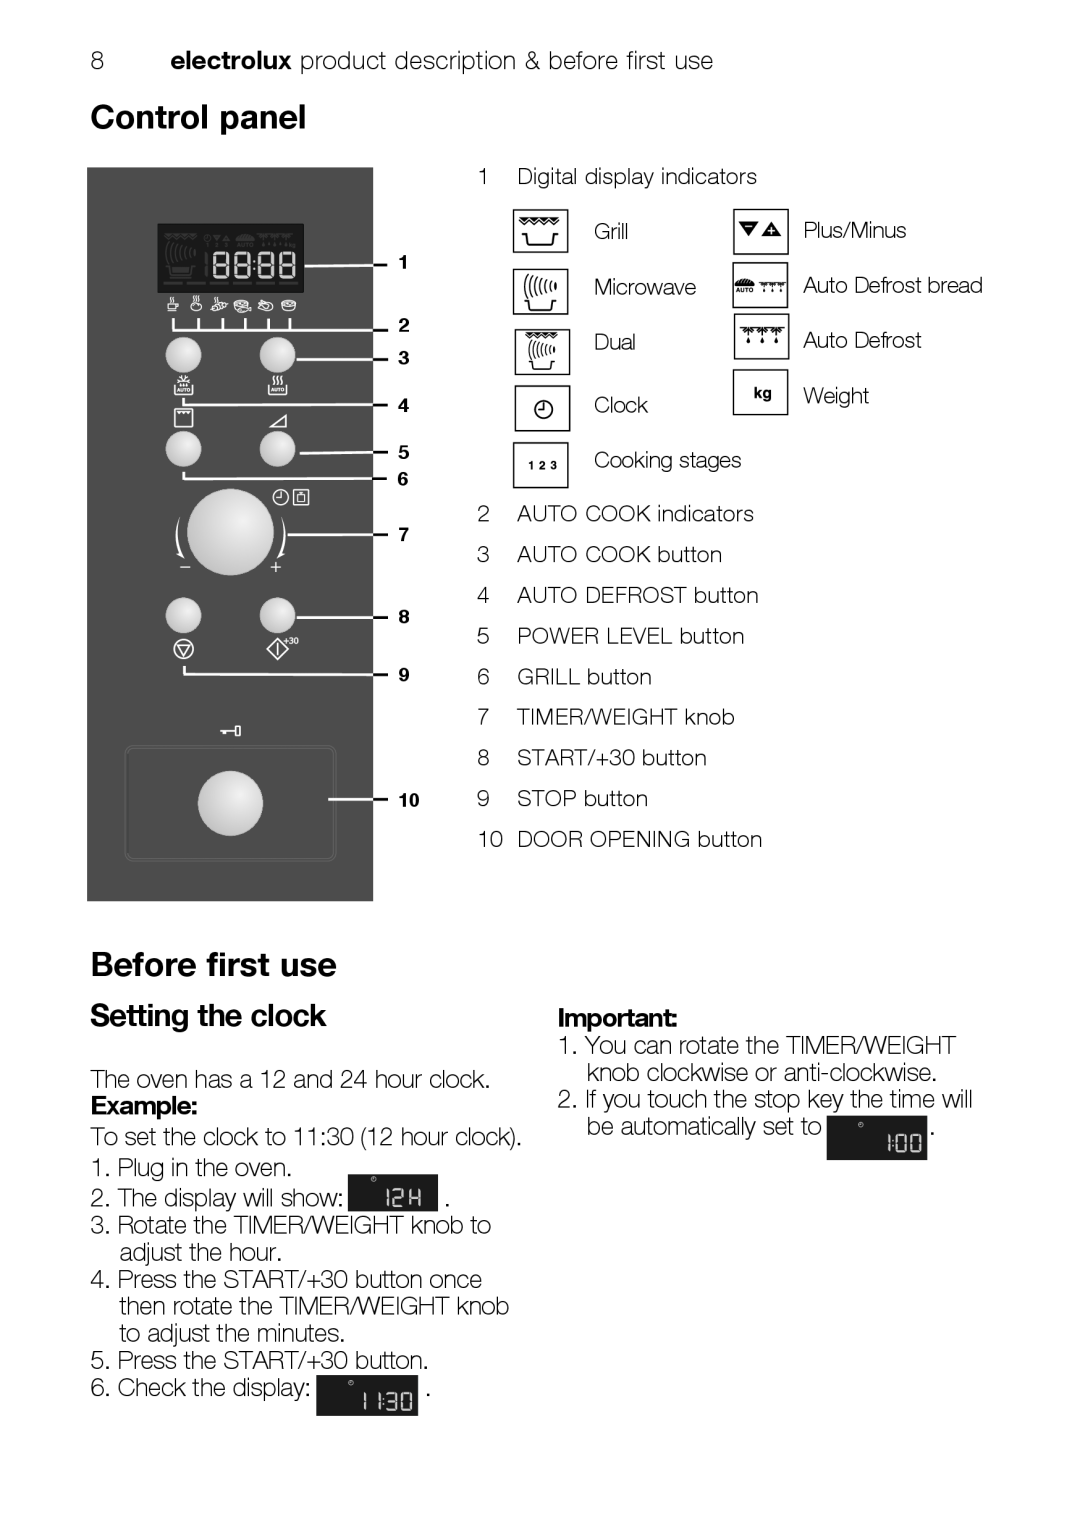 Electrolux EMS26415 user manual Control panel, Before first use, Setting the clock, Example 